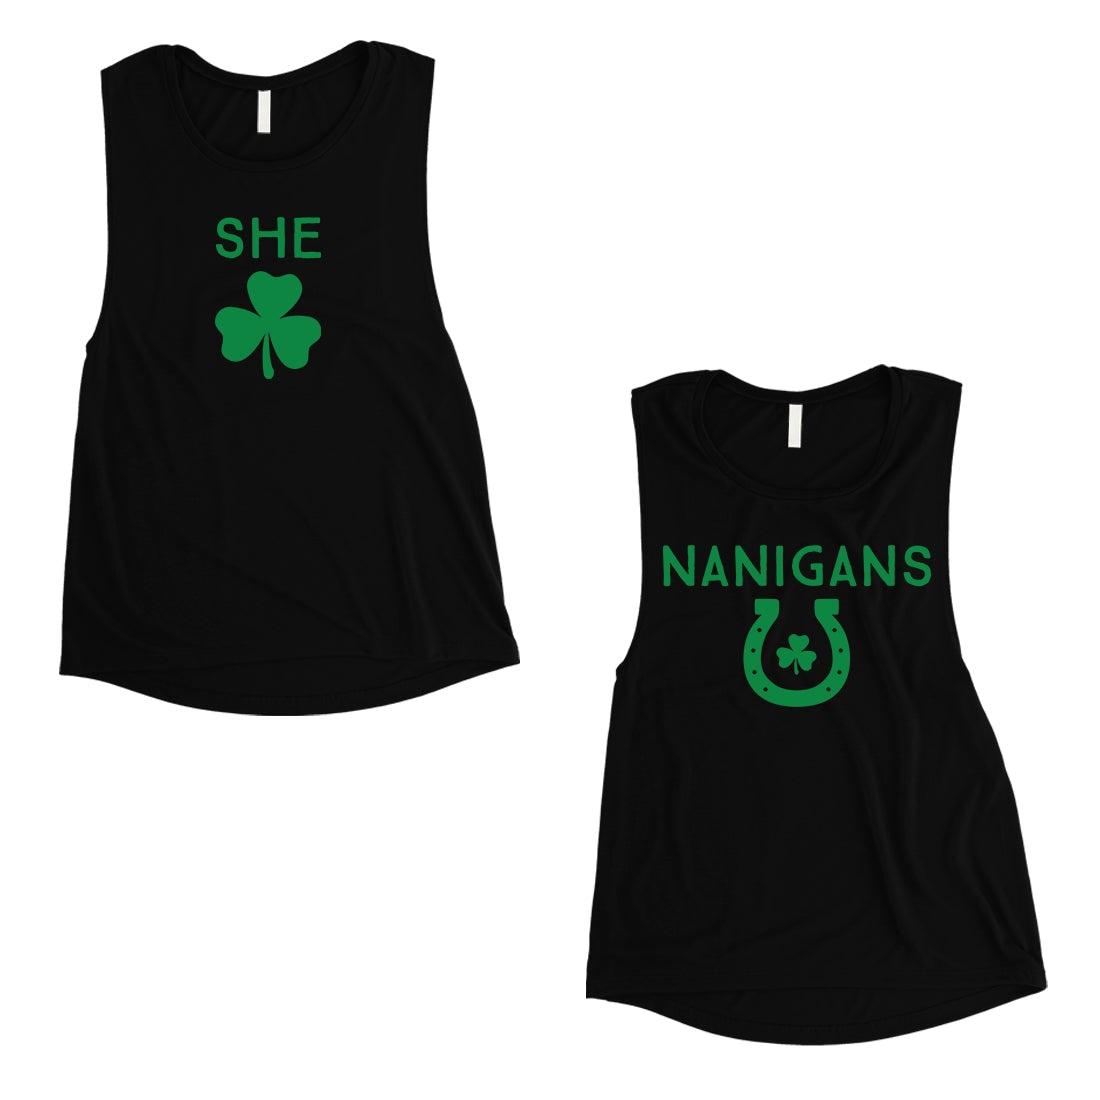 Shenanigans St Patrick's Day Matching Muscle Tank Tops For BFF Gift Black